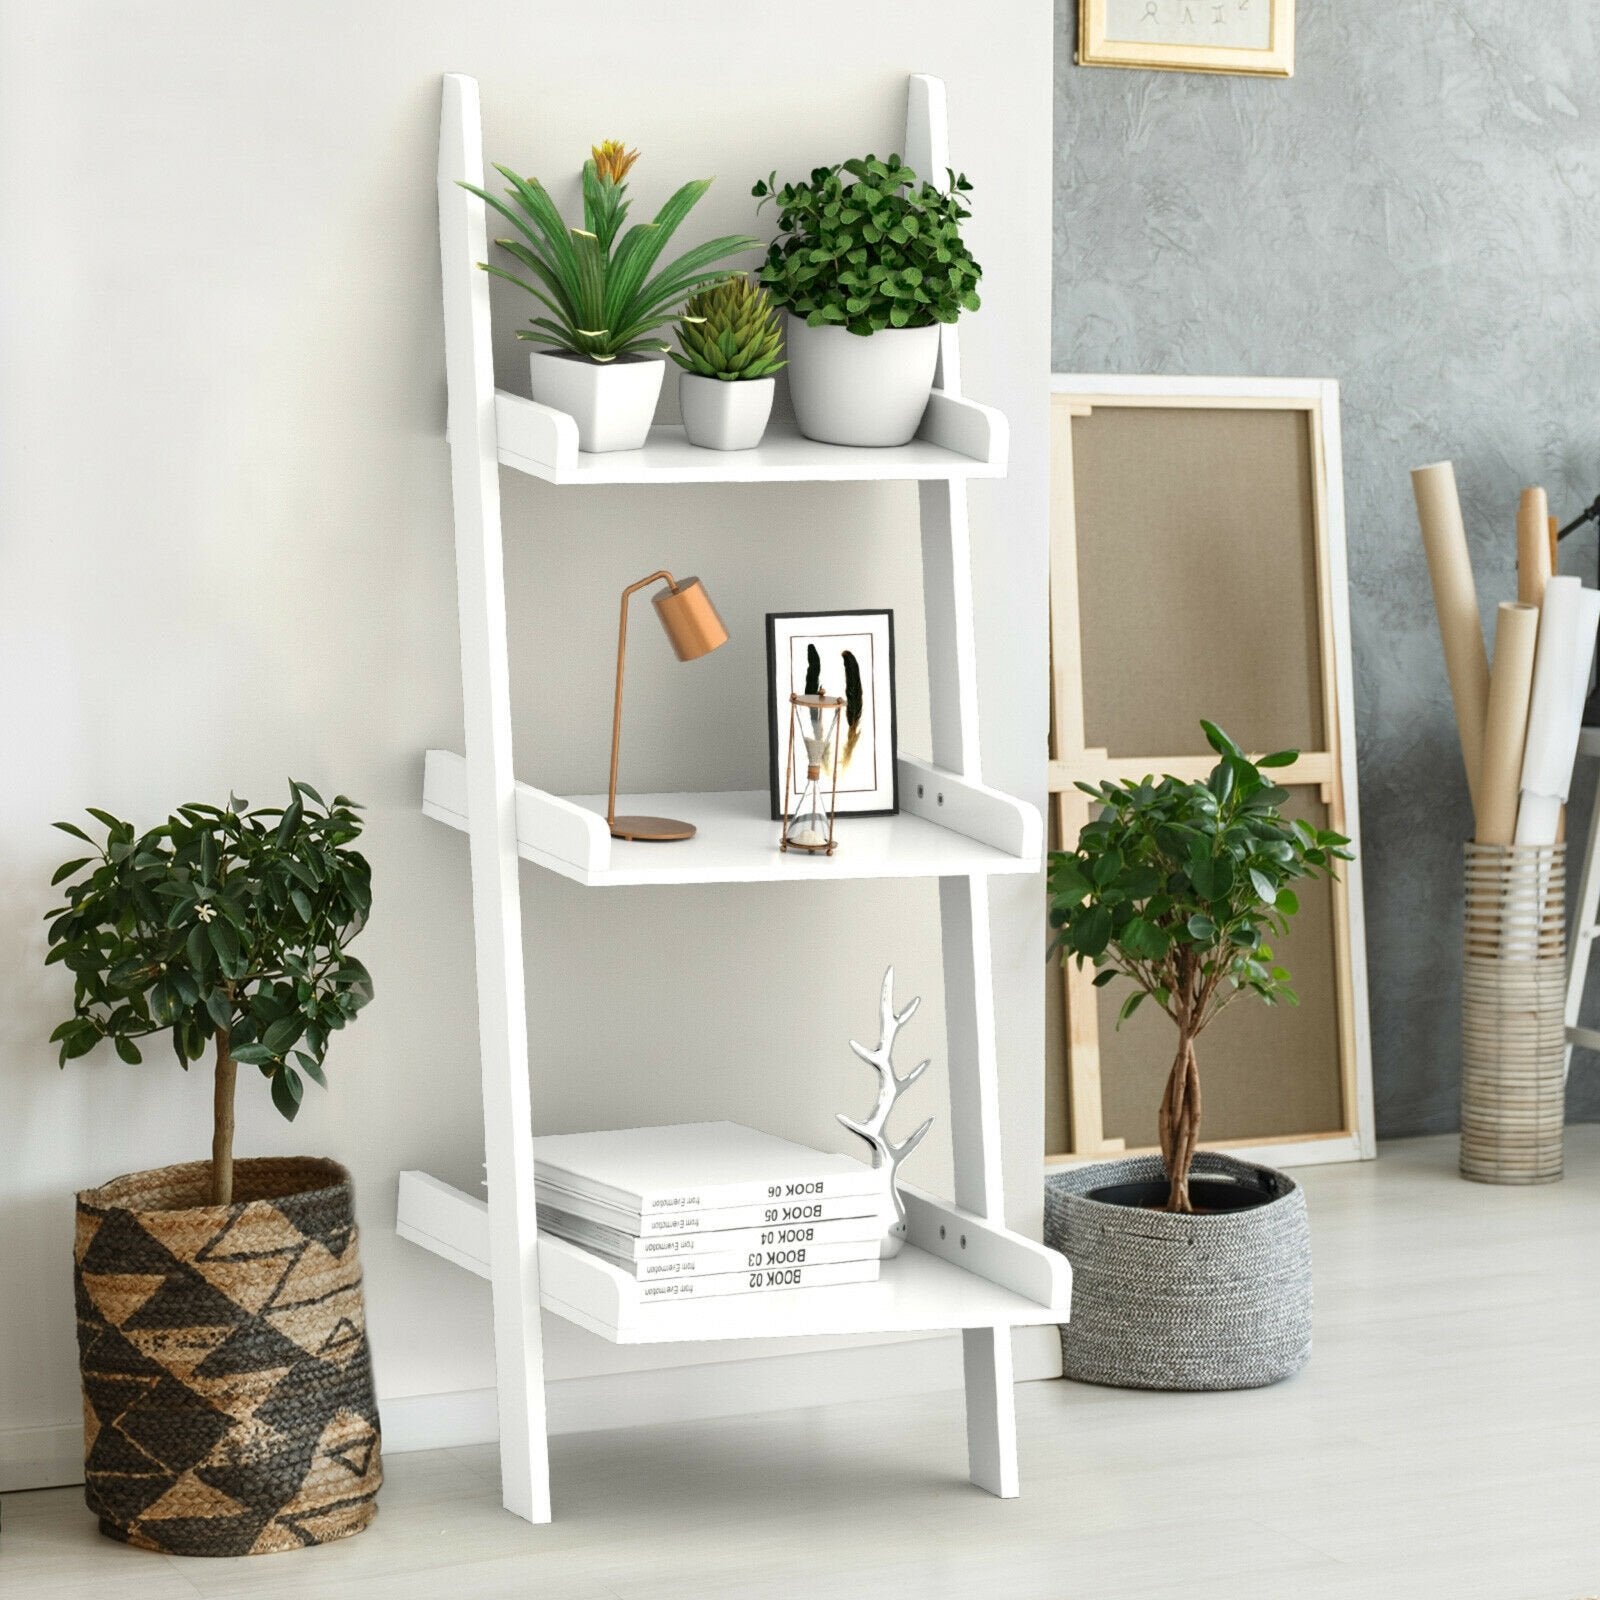 3 Tier Leaning Rack Wall Book Shelf Ladder, White at Gallery Canada